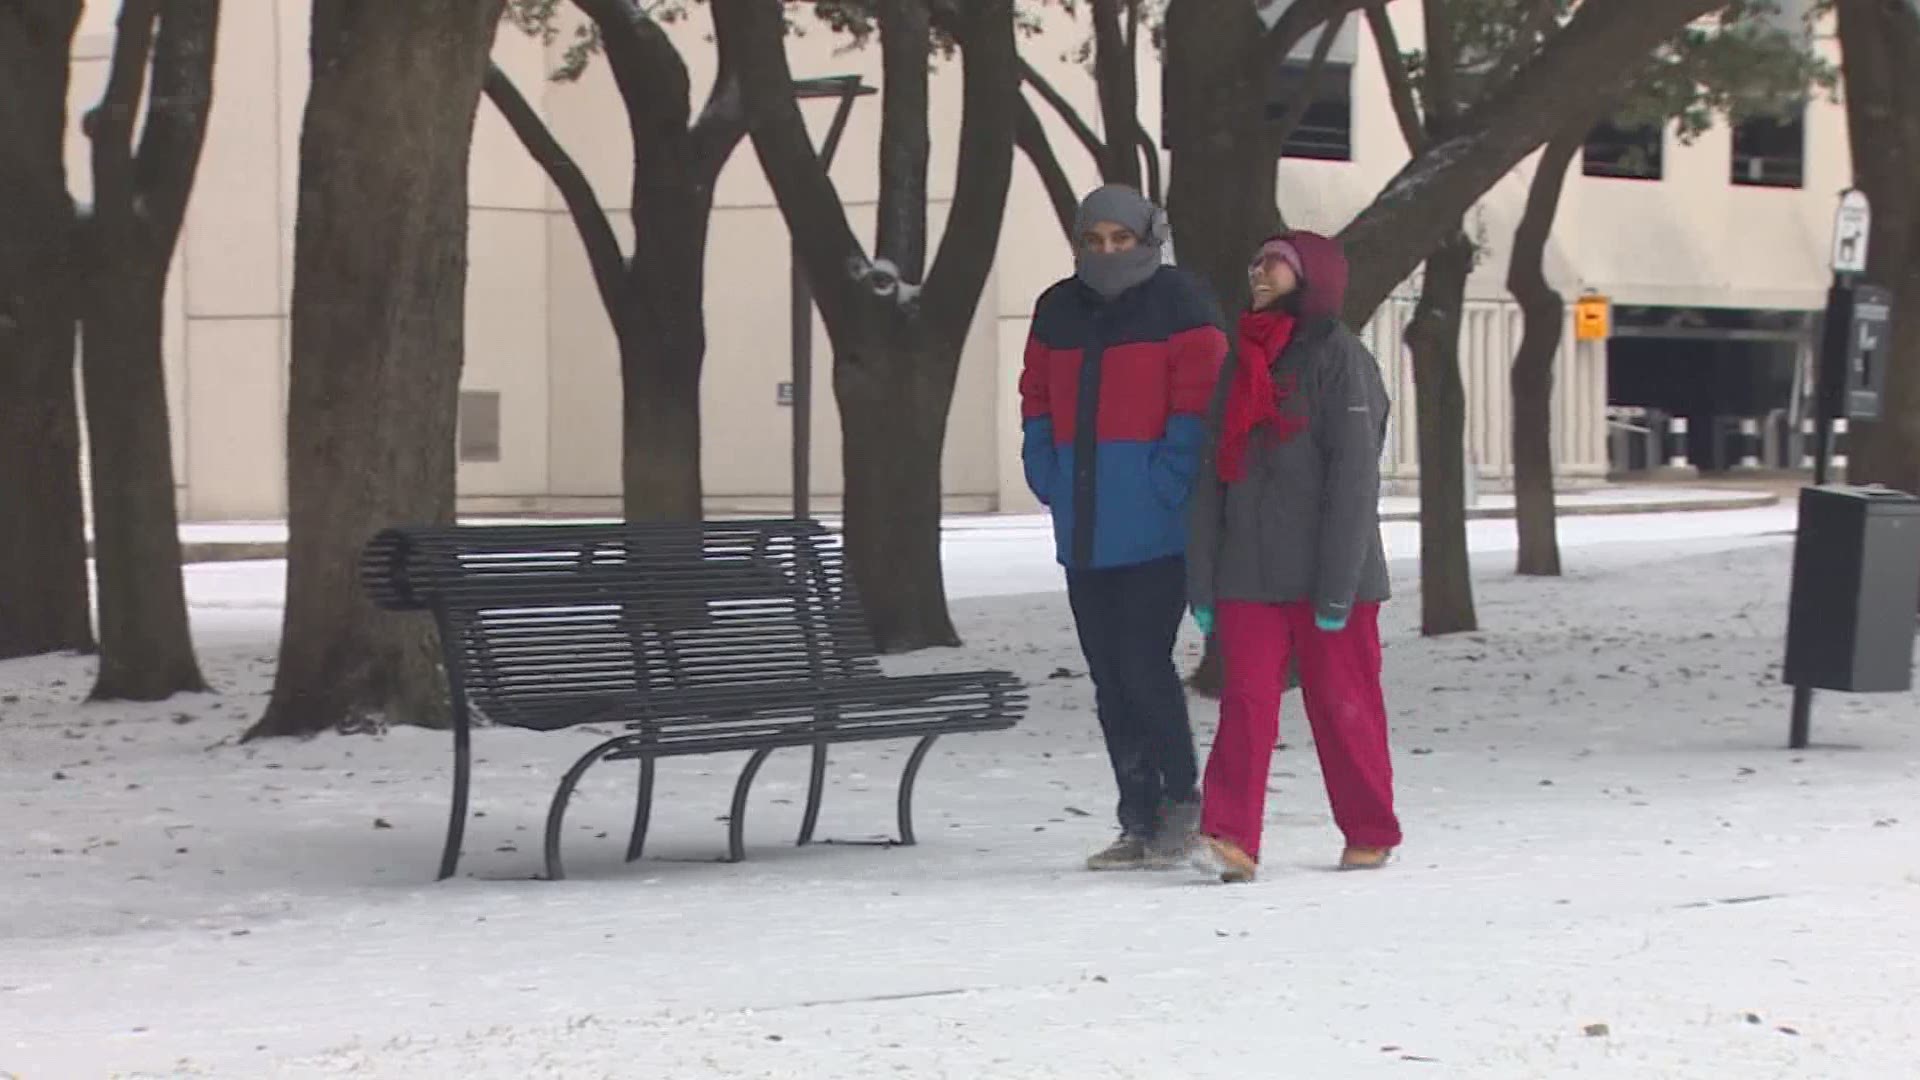 Houston is a winter wonderland, but doubt be fooled, road conditions are still hazardous. Many Houstonians still headed out Monday to explore.